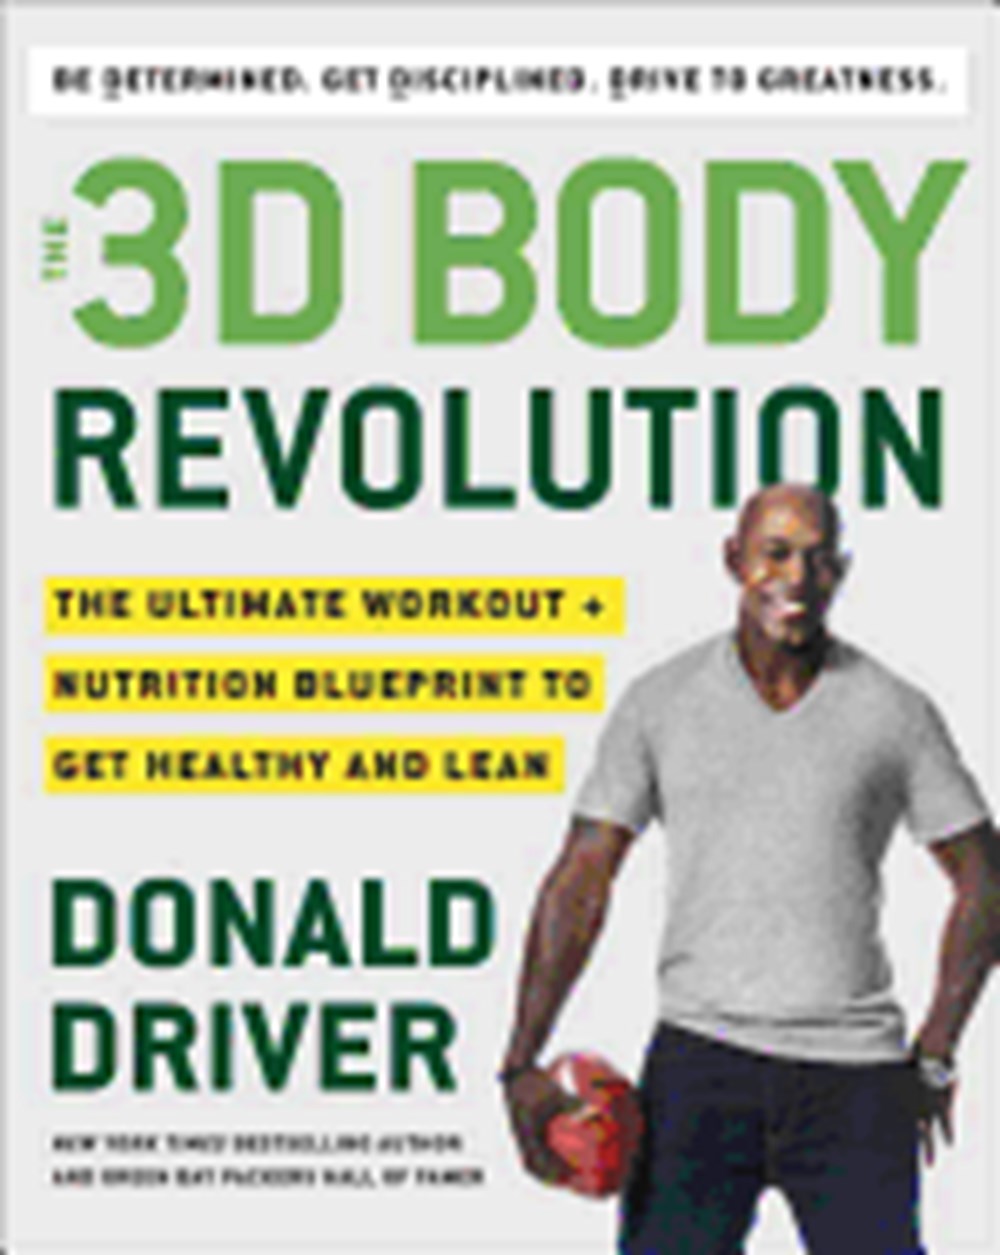 3D Body Revolution: The Ultimate Workout + Nutrition Blueprint to Get Healthy and Lean